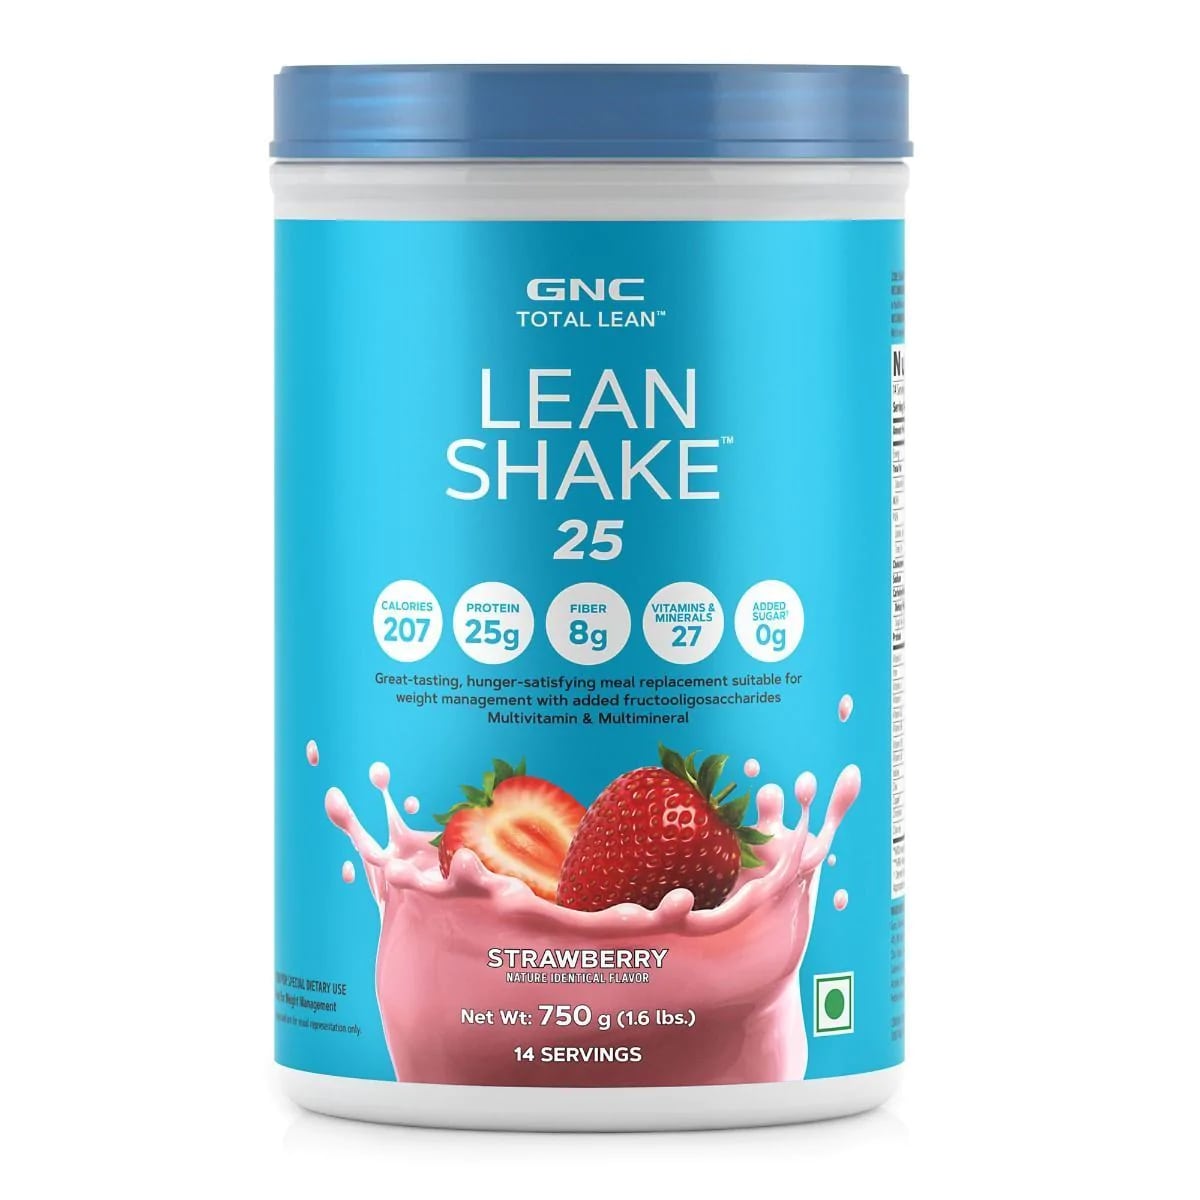 GNC Total Lean Shake 25 Strawberry Flavour Powder, 750 gm, Pack of 1 